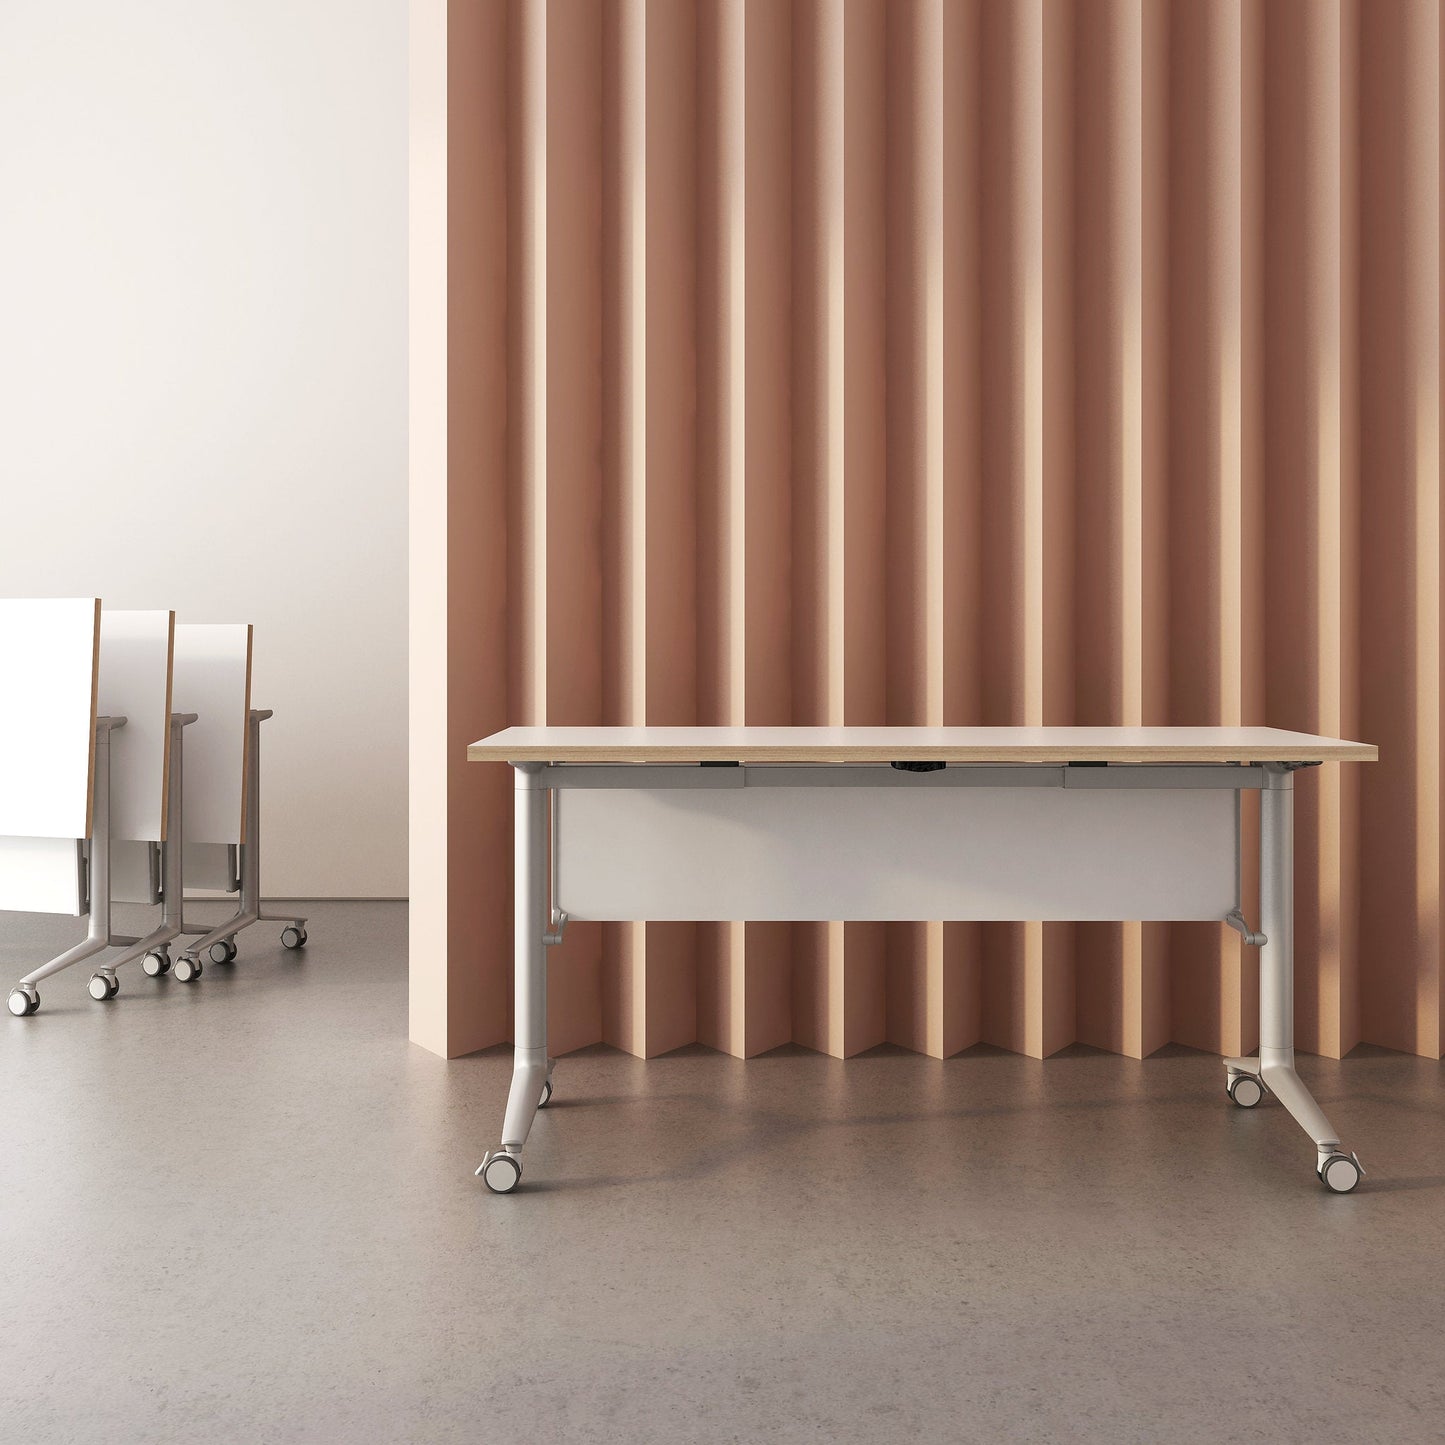 Lune Flip Training Table by Friant - Wholesale Office Furniture